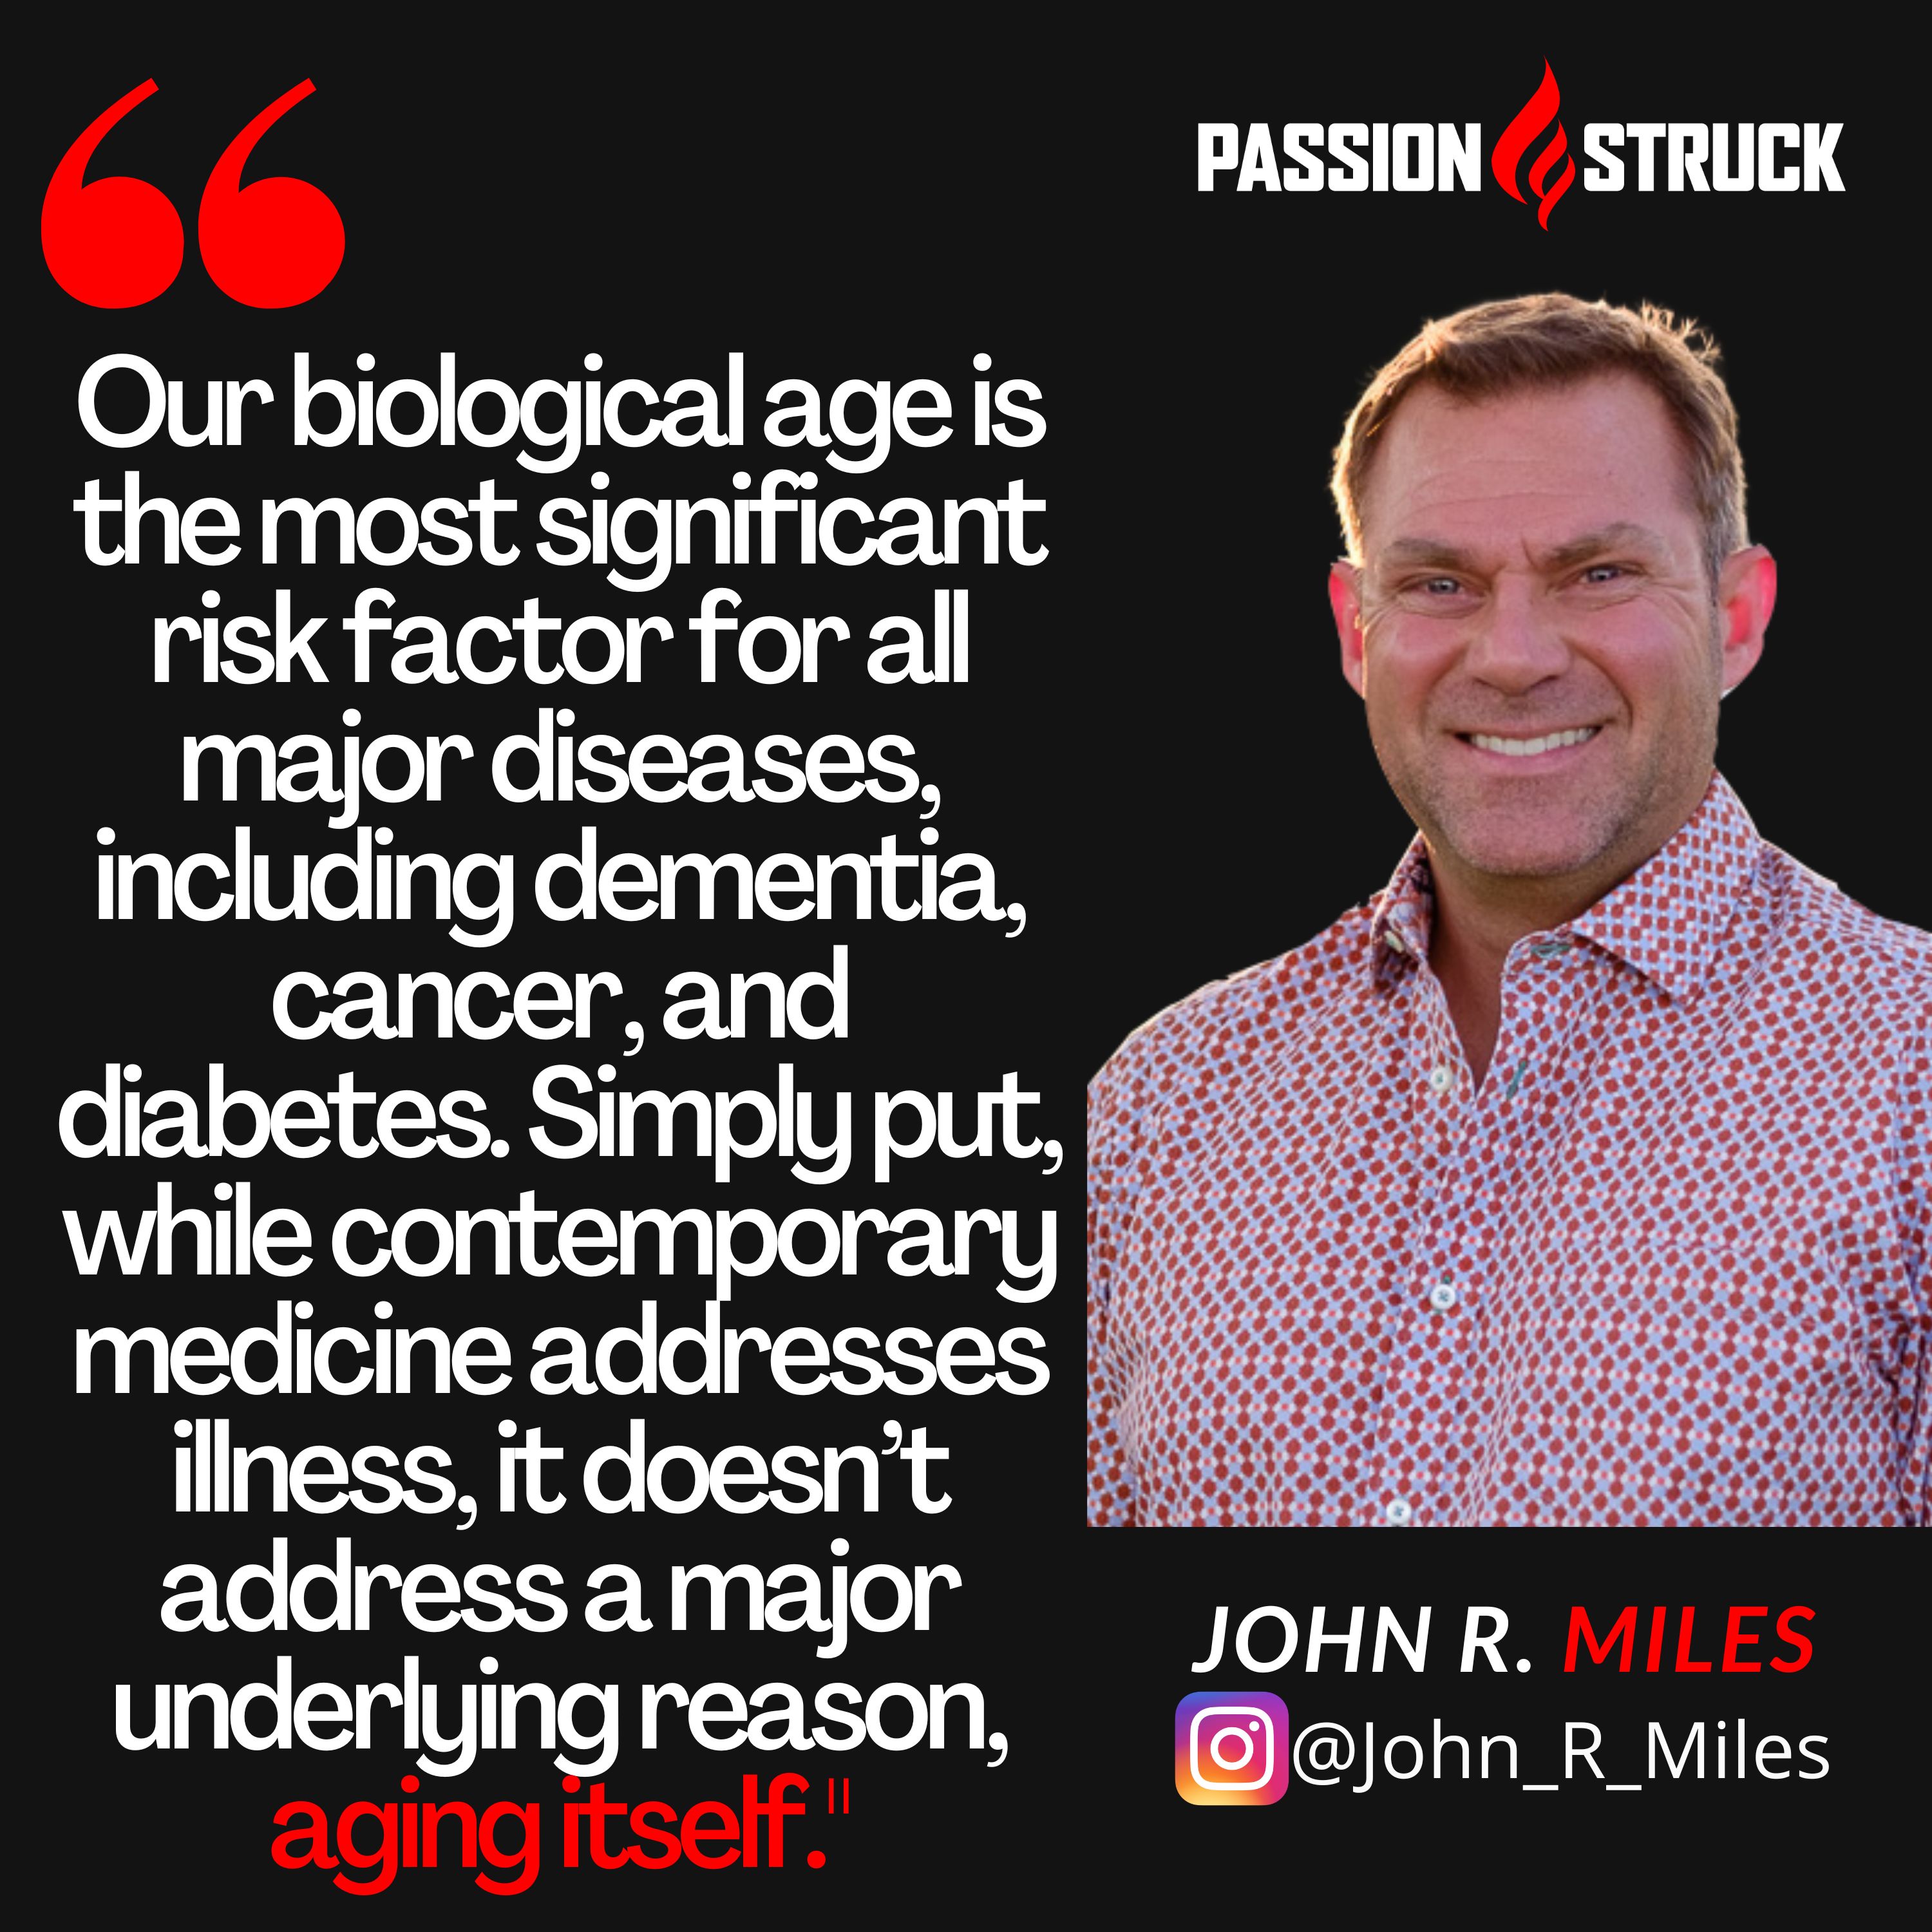 Quote by John R. Miles: Our biological age is the most significant risk factor for all major diseases, including dementia, cancer, and diabetes. Simply put, while contemporary medicine addresses illness, it doesn’t address a major underlying reason, aging itself.